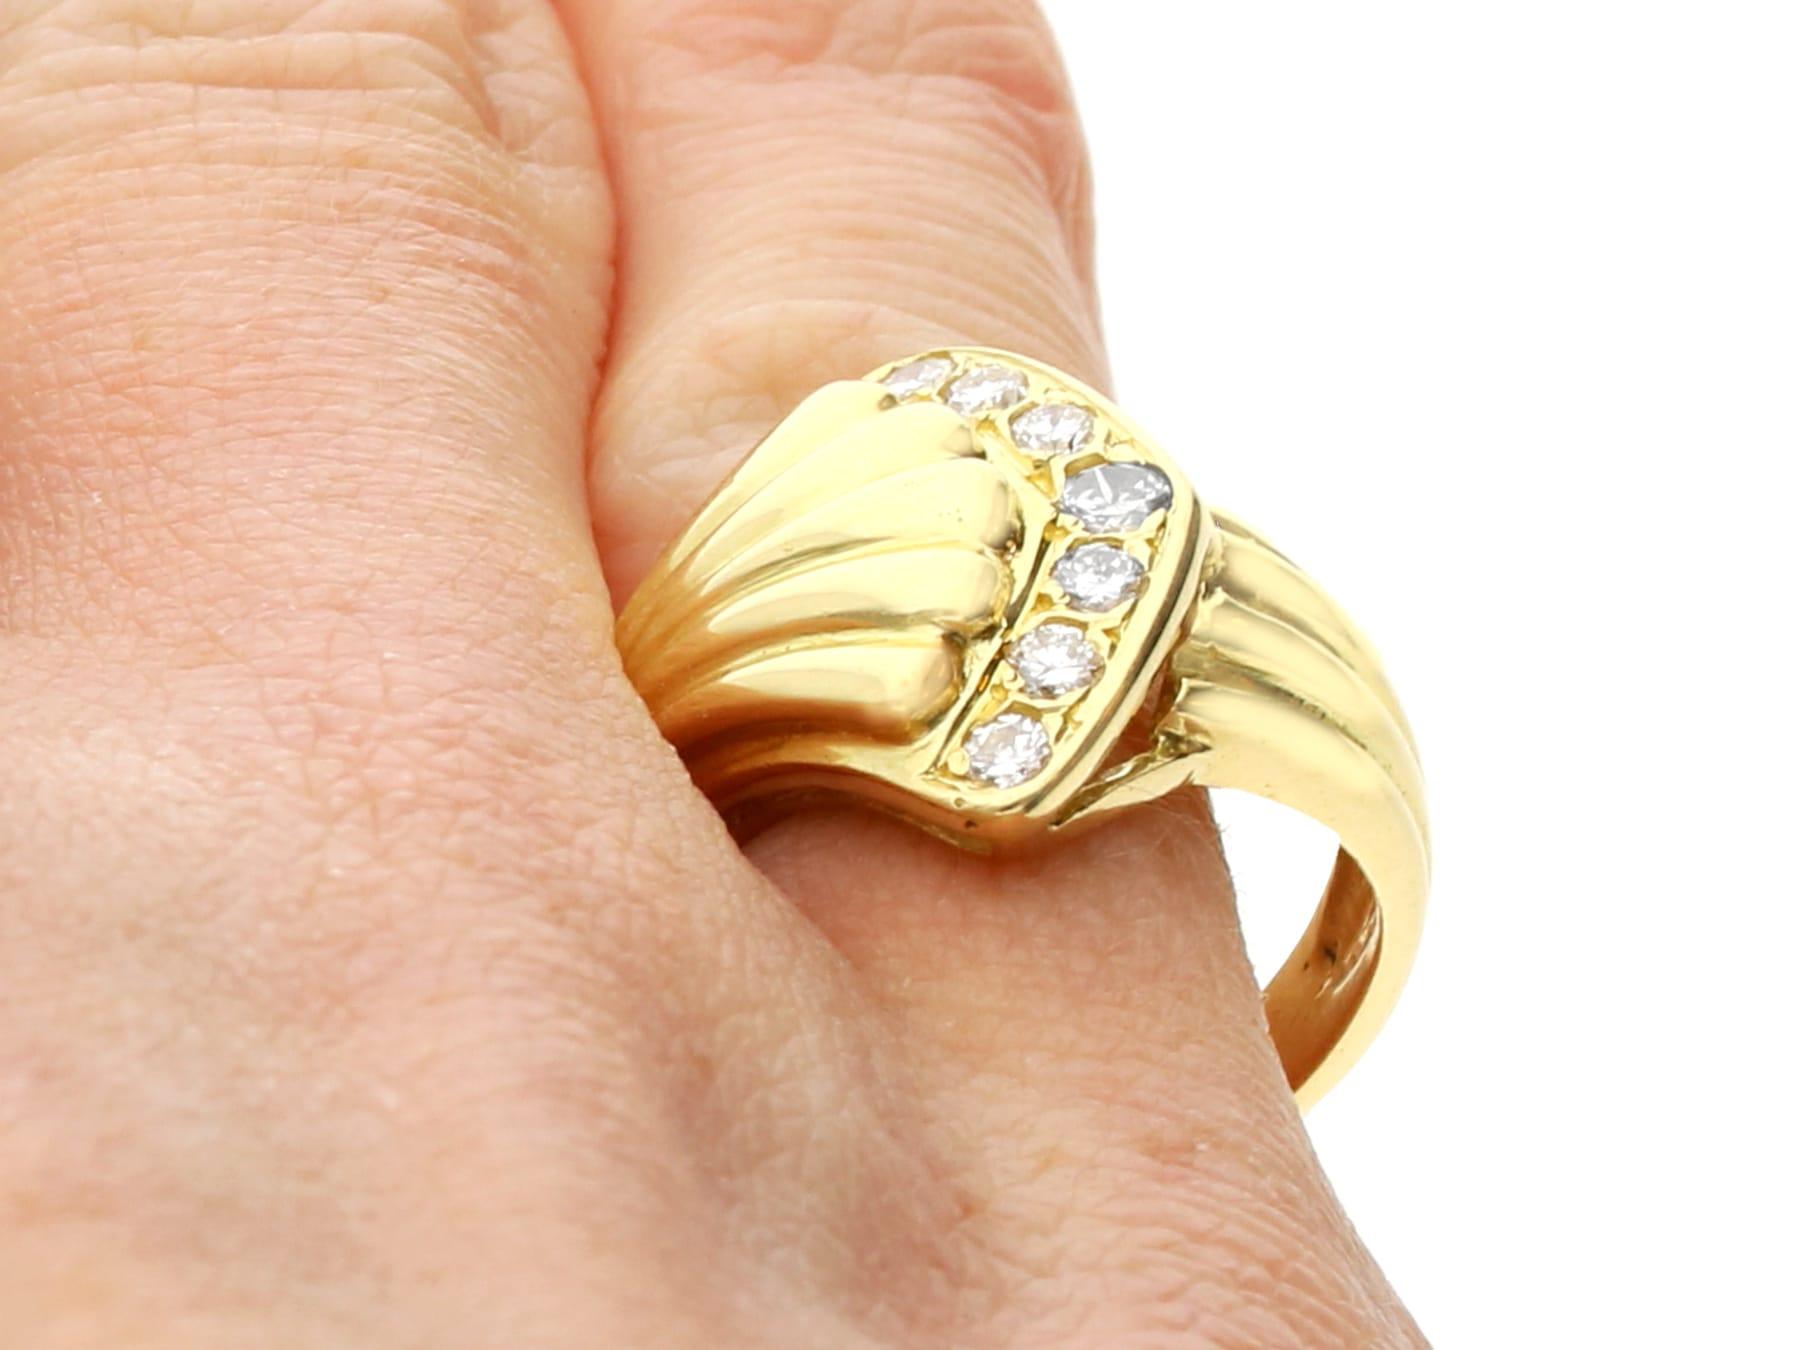 1950s Vintage 0.18 Carat Diamond and 18k Yellow Gold Dress Ring For Sale 4